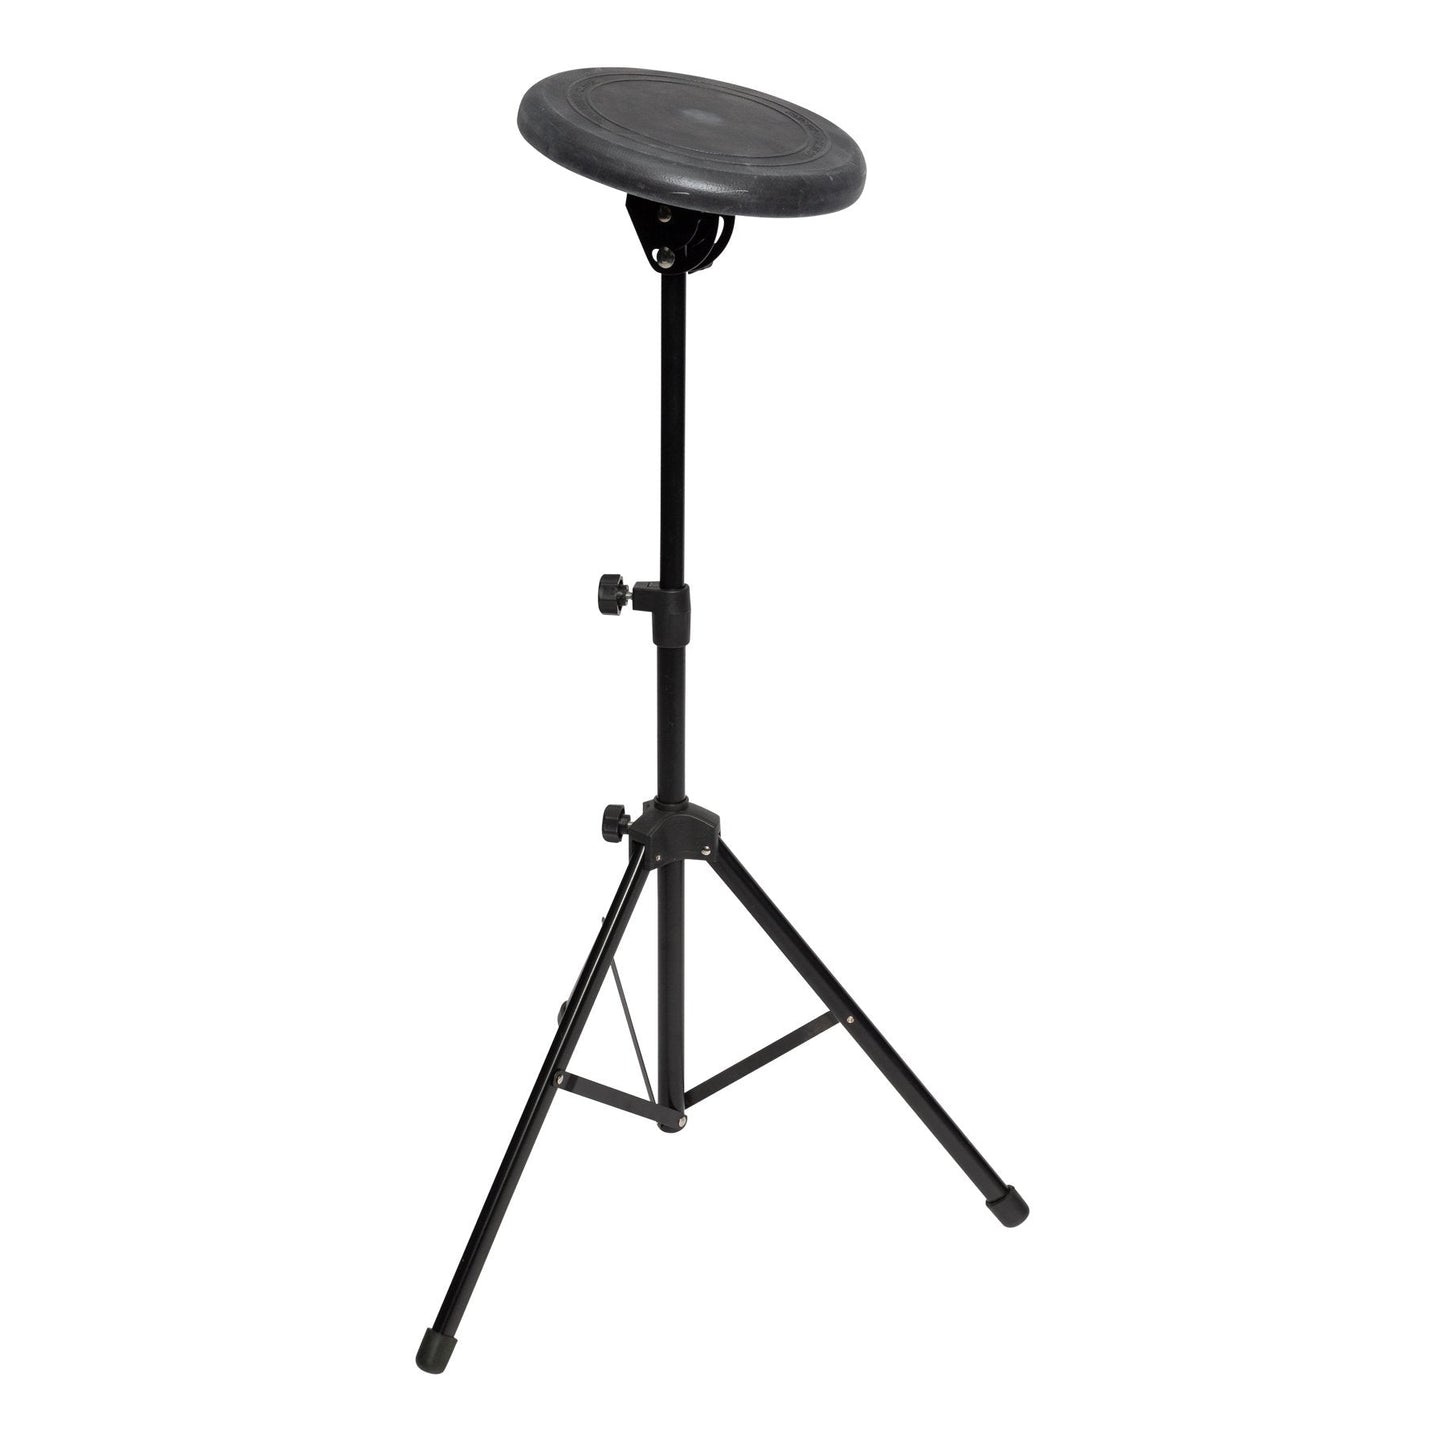 Sonic Drive Drum Practise Pad Stand (Black)